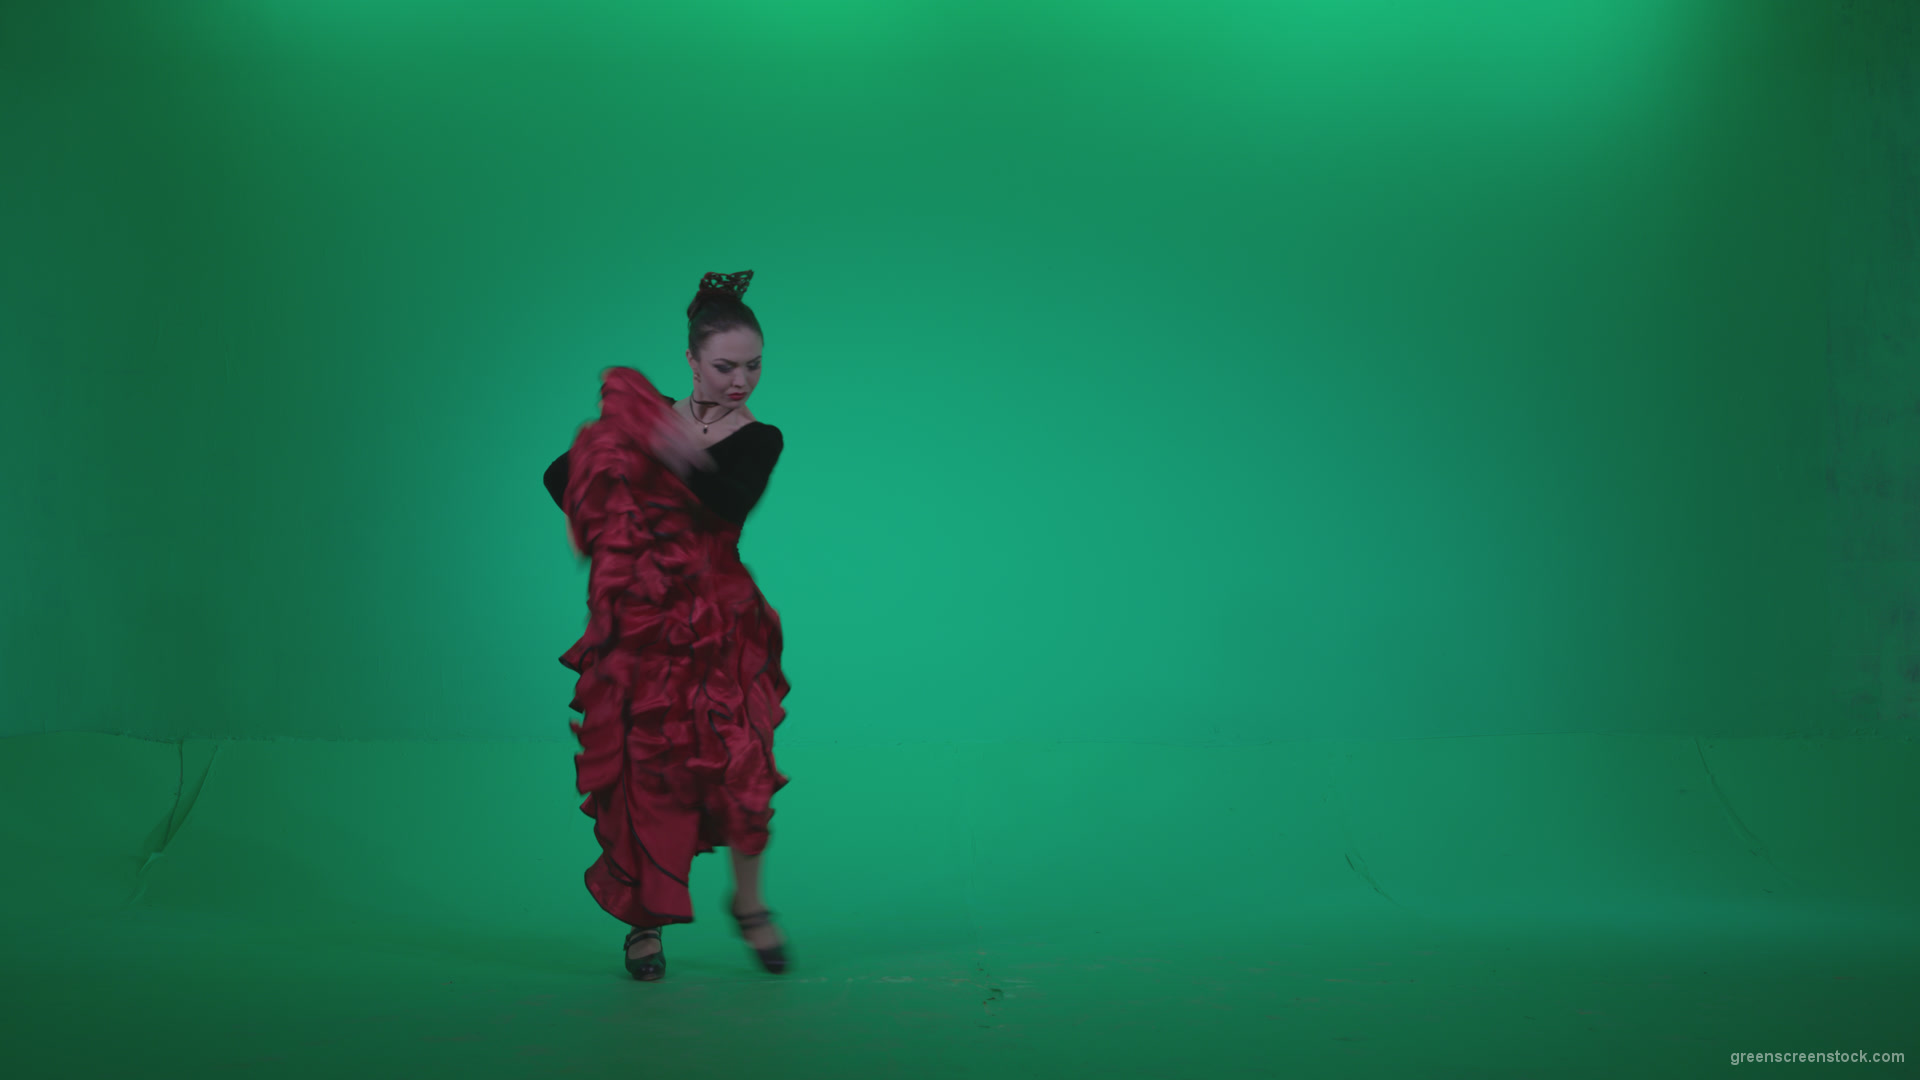 Flamenco-Red-and-Black-Dress-rb5-Green-Screen-Video-Footage_006 Green Screen Stock